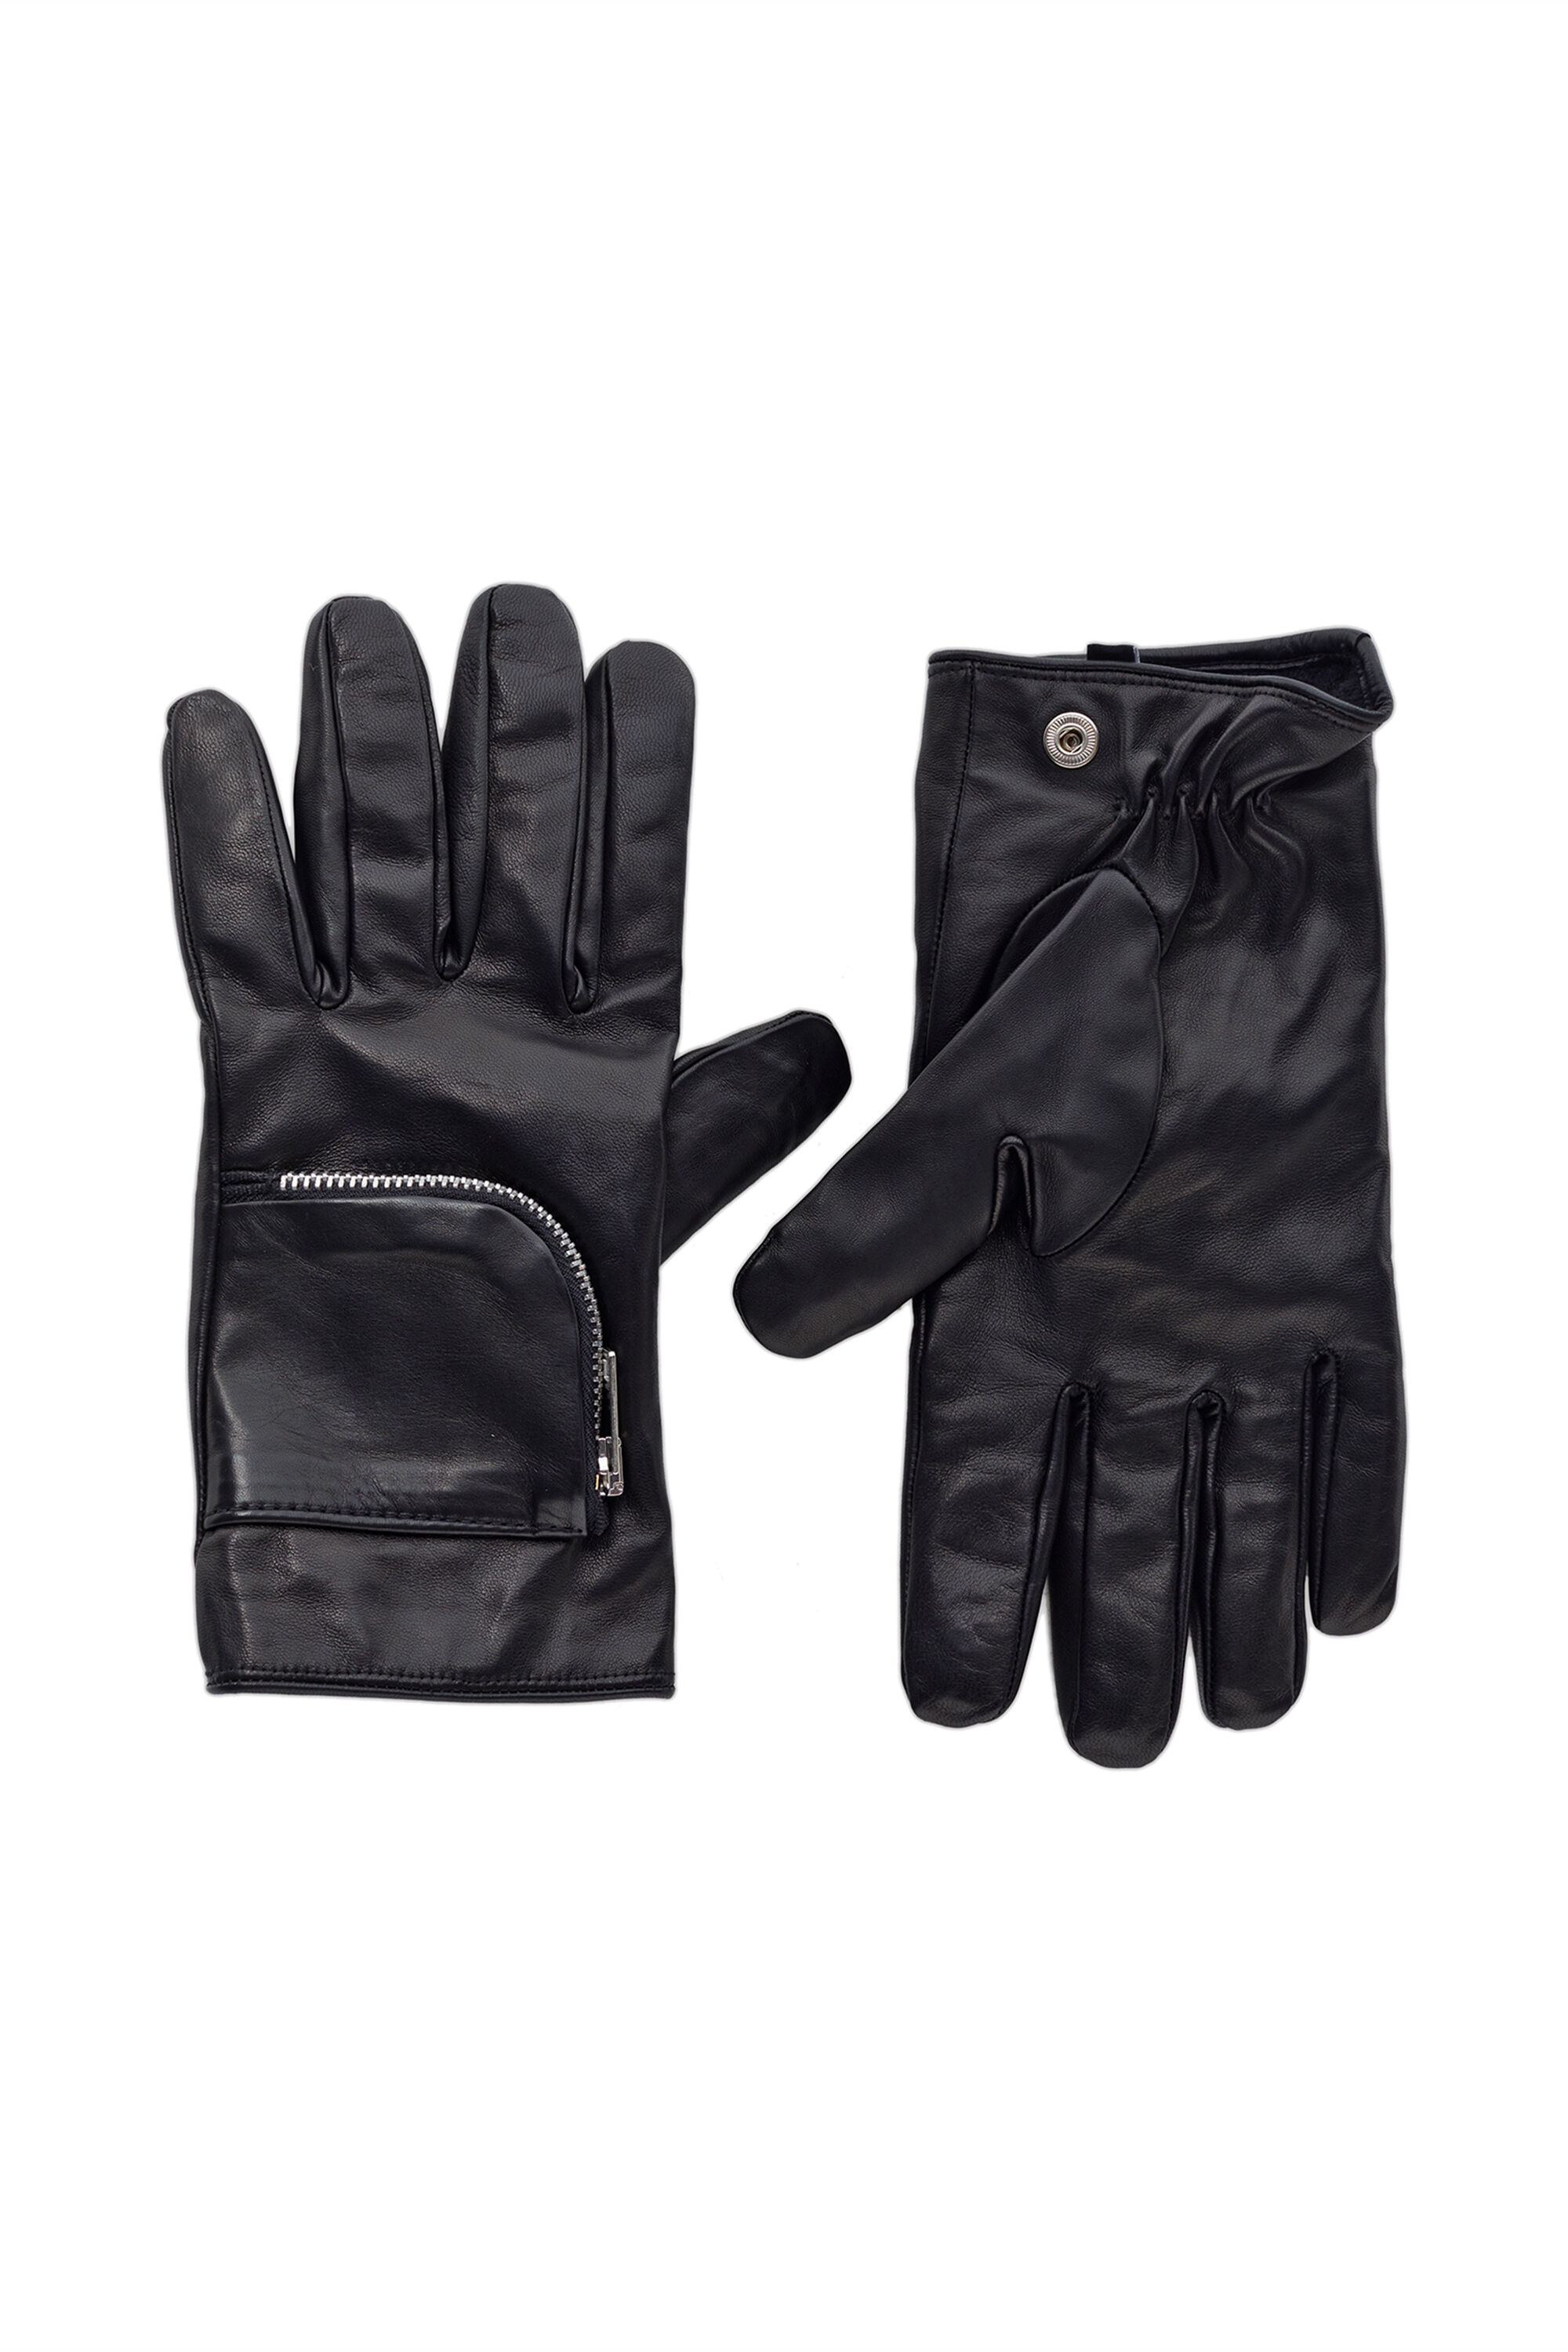 Project Source Large Leather Construction Gloves, (3-Pairs)